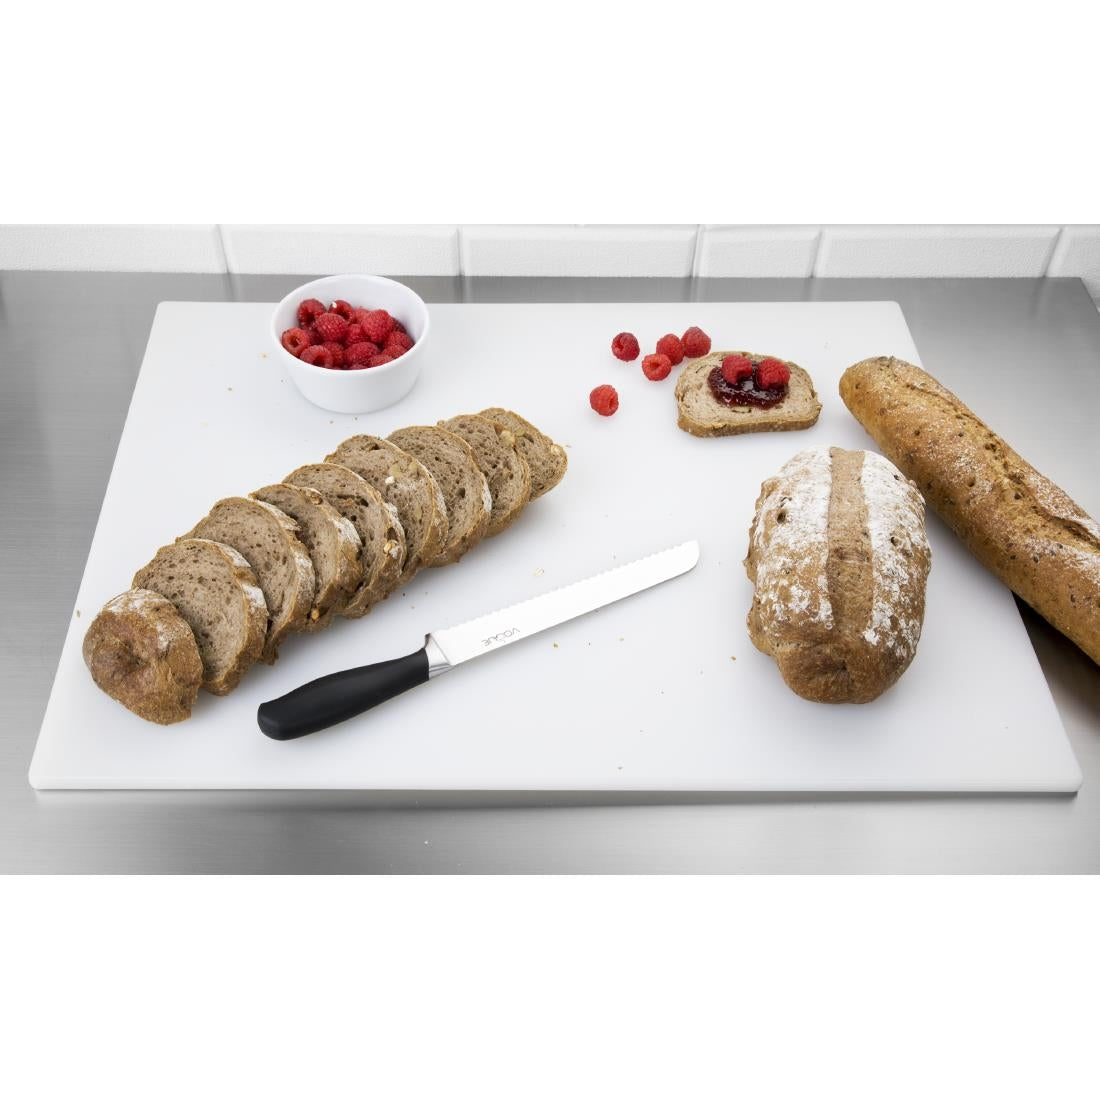 Hygiplas Low Density White Chopping Board Large JD Catering Equipment Solutions Ltd